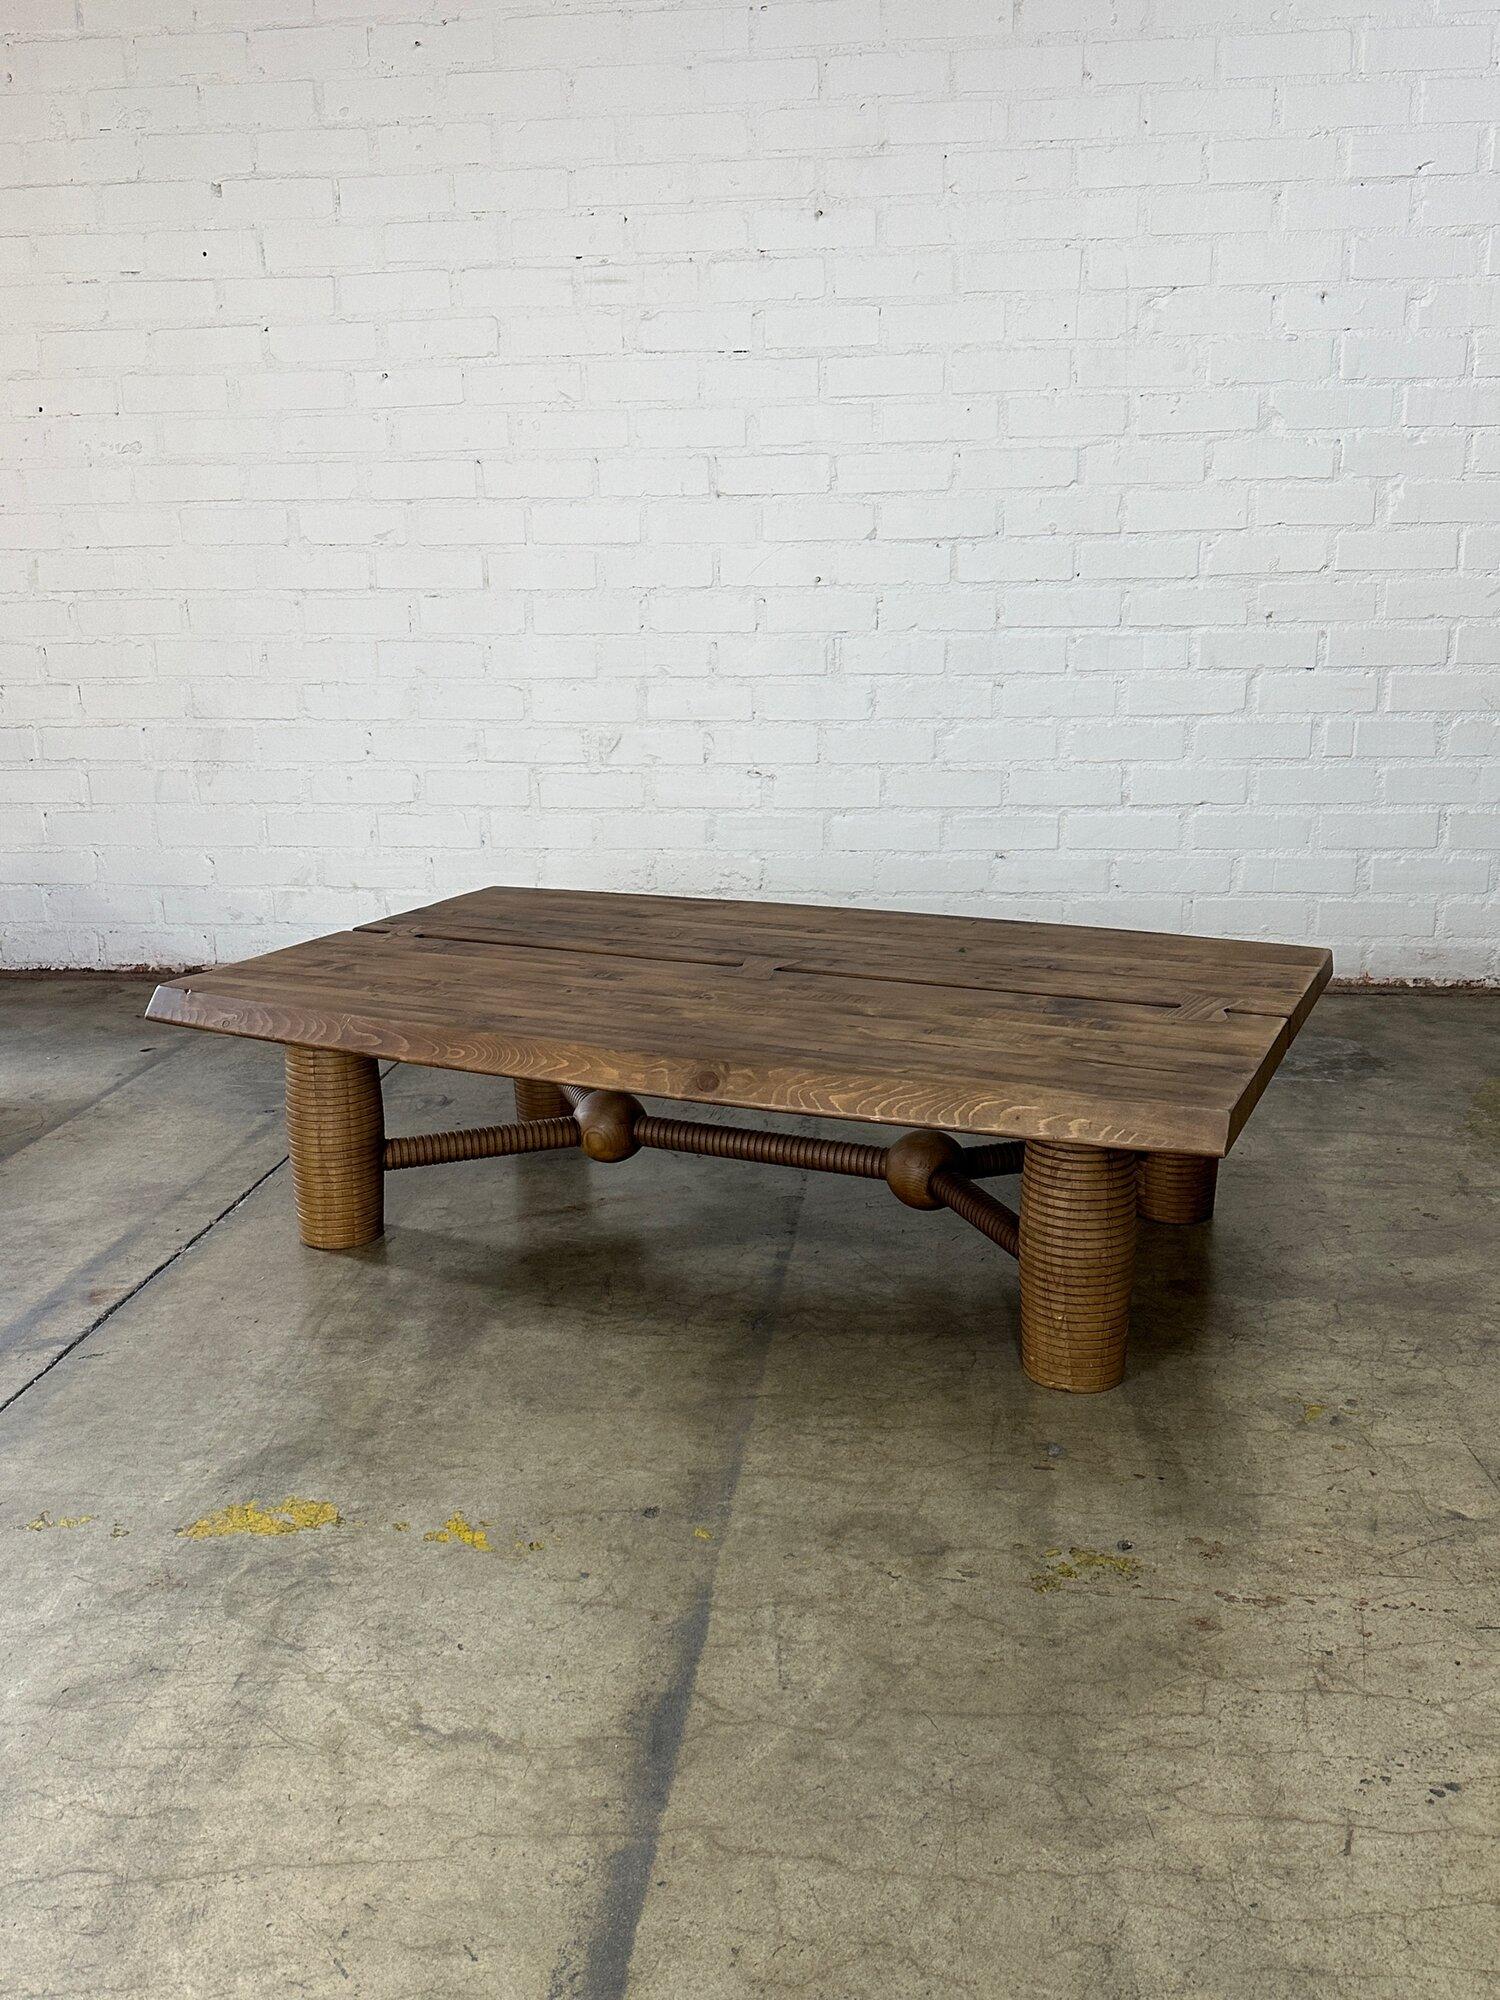 W60 D39 H16

Gently used contemporary coffee table made using reclaimed oak. Item features ribbed legs and surface split down the center. This item was used for staging and shows well as intended with aged hues and wood imperfections. Pick up this